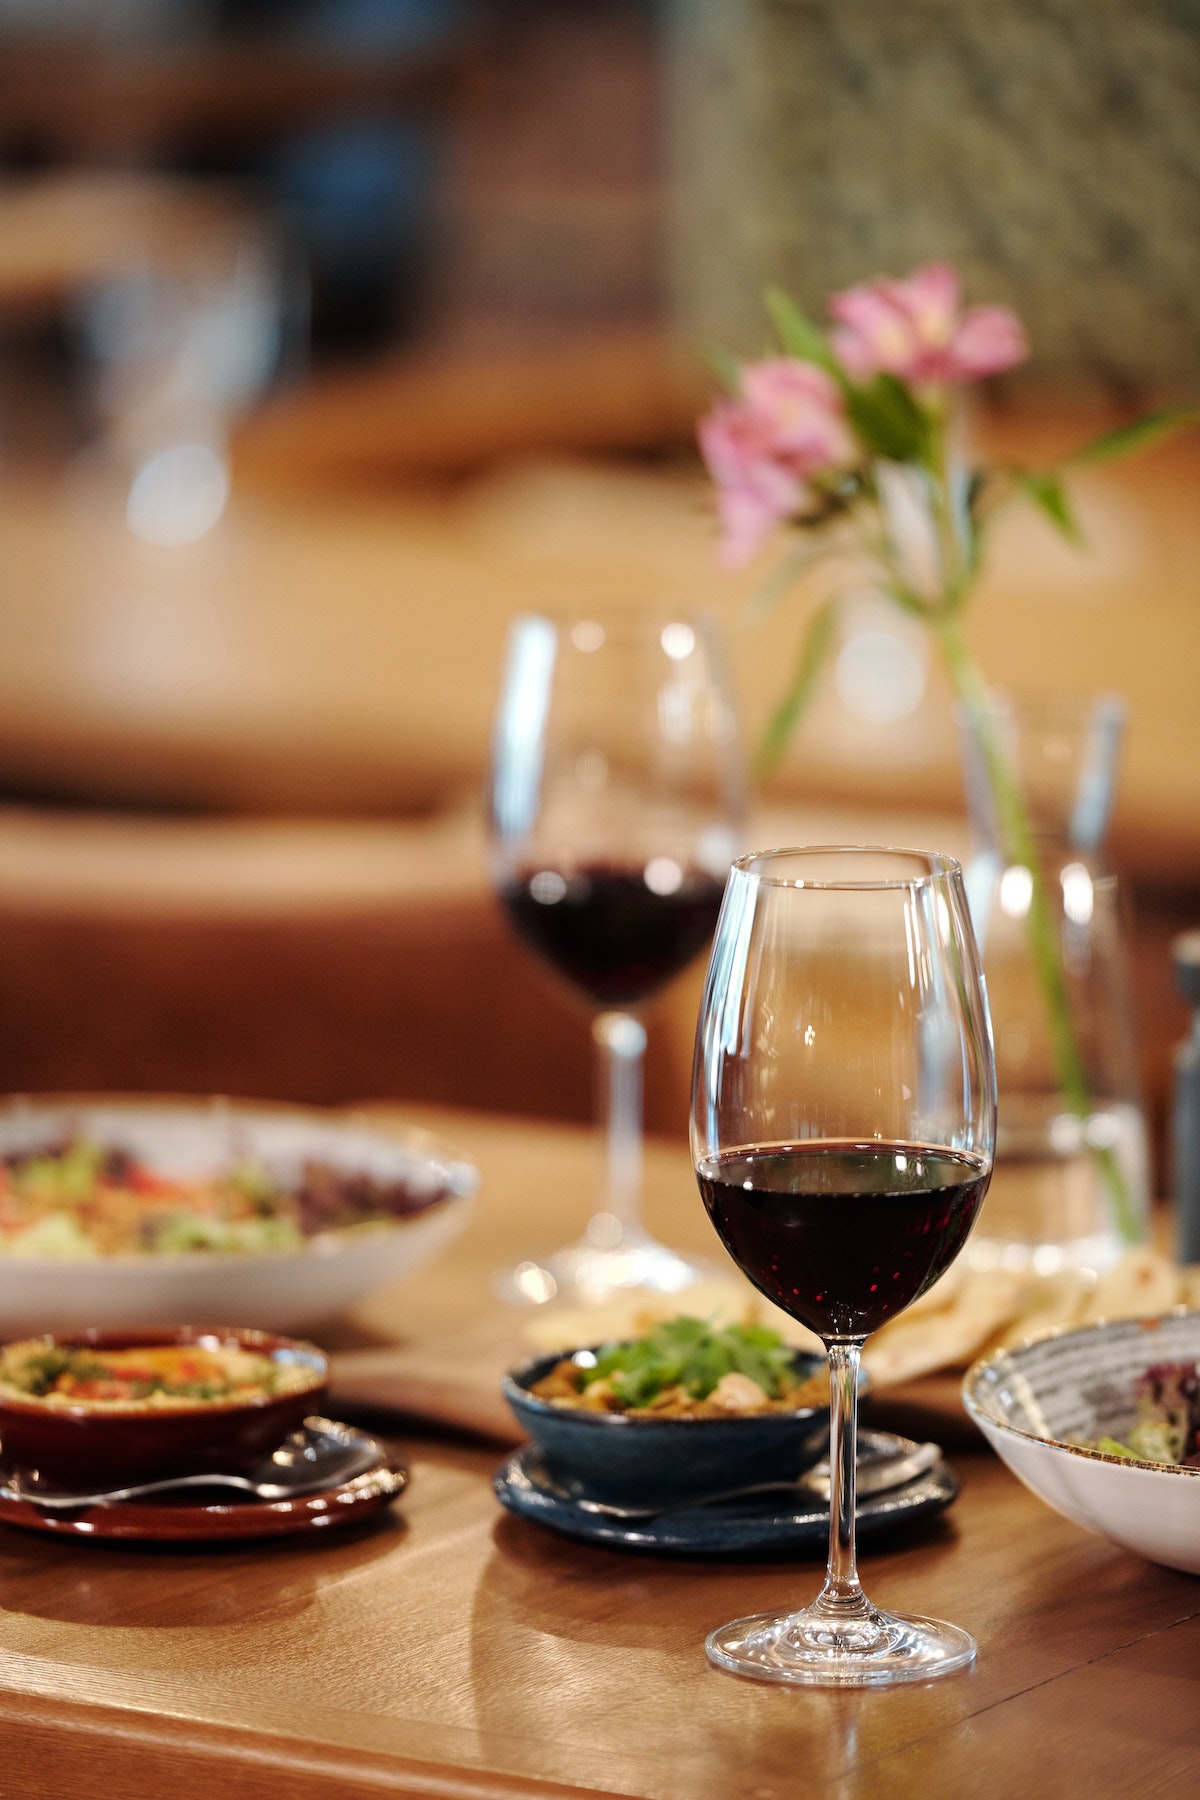 two glasses of red wine and small plate dishes on a wooden table